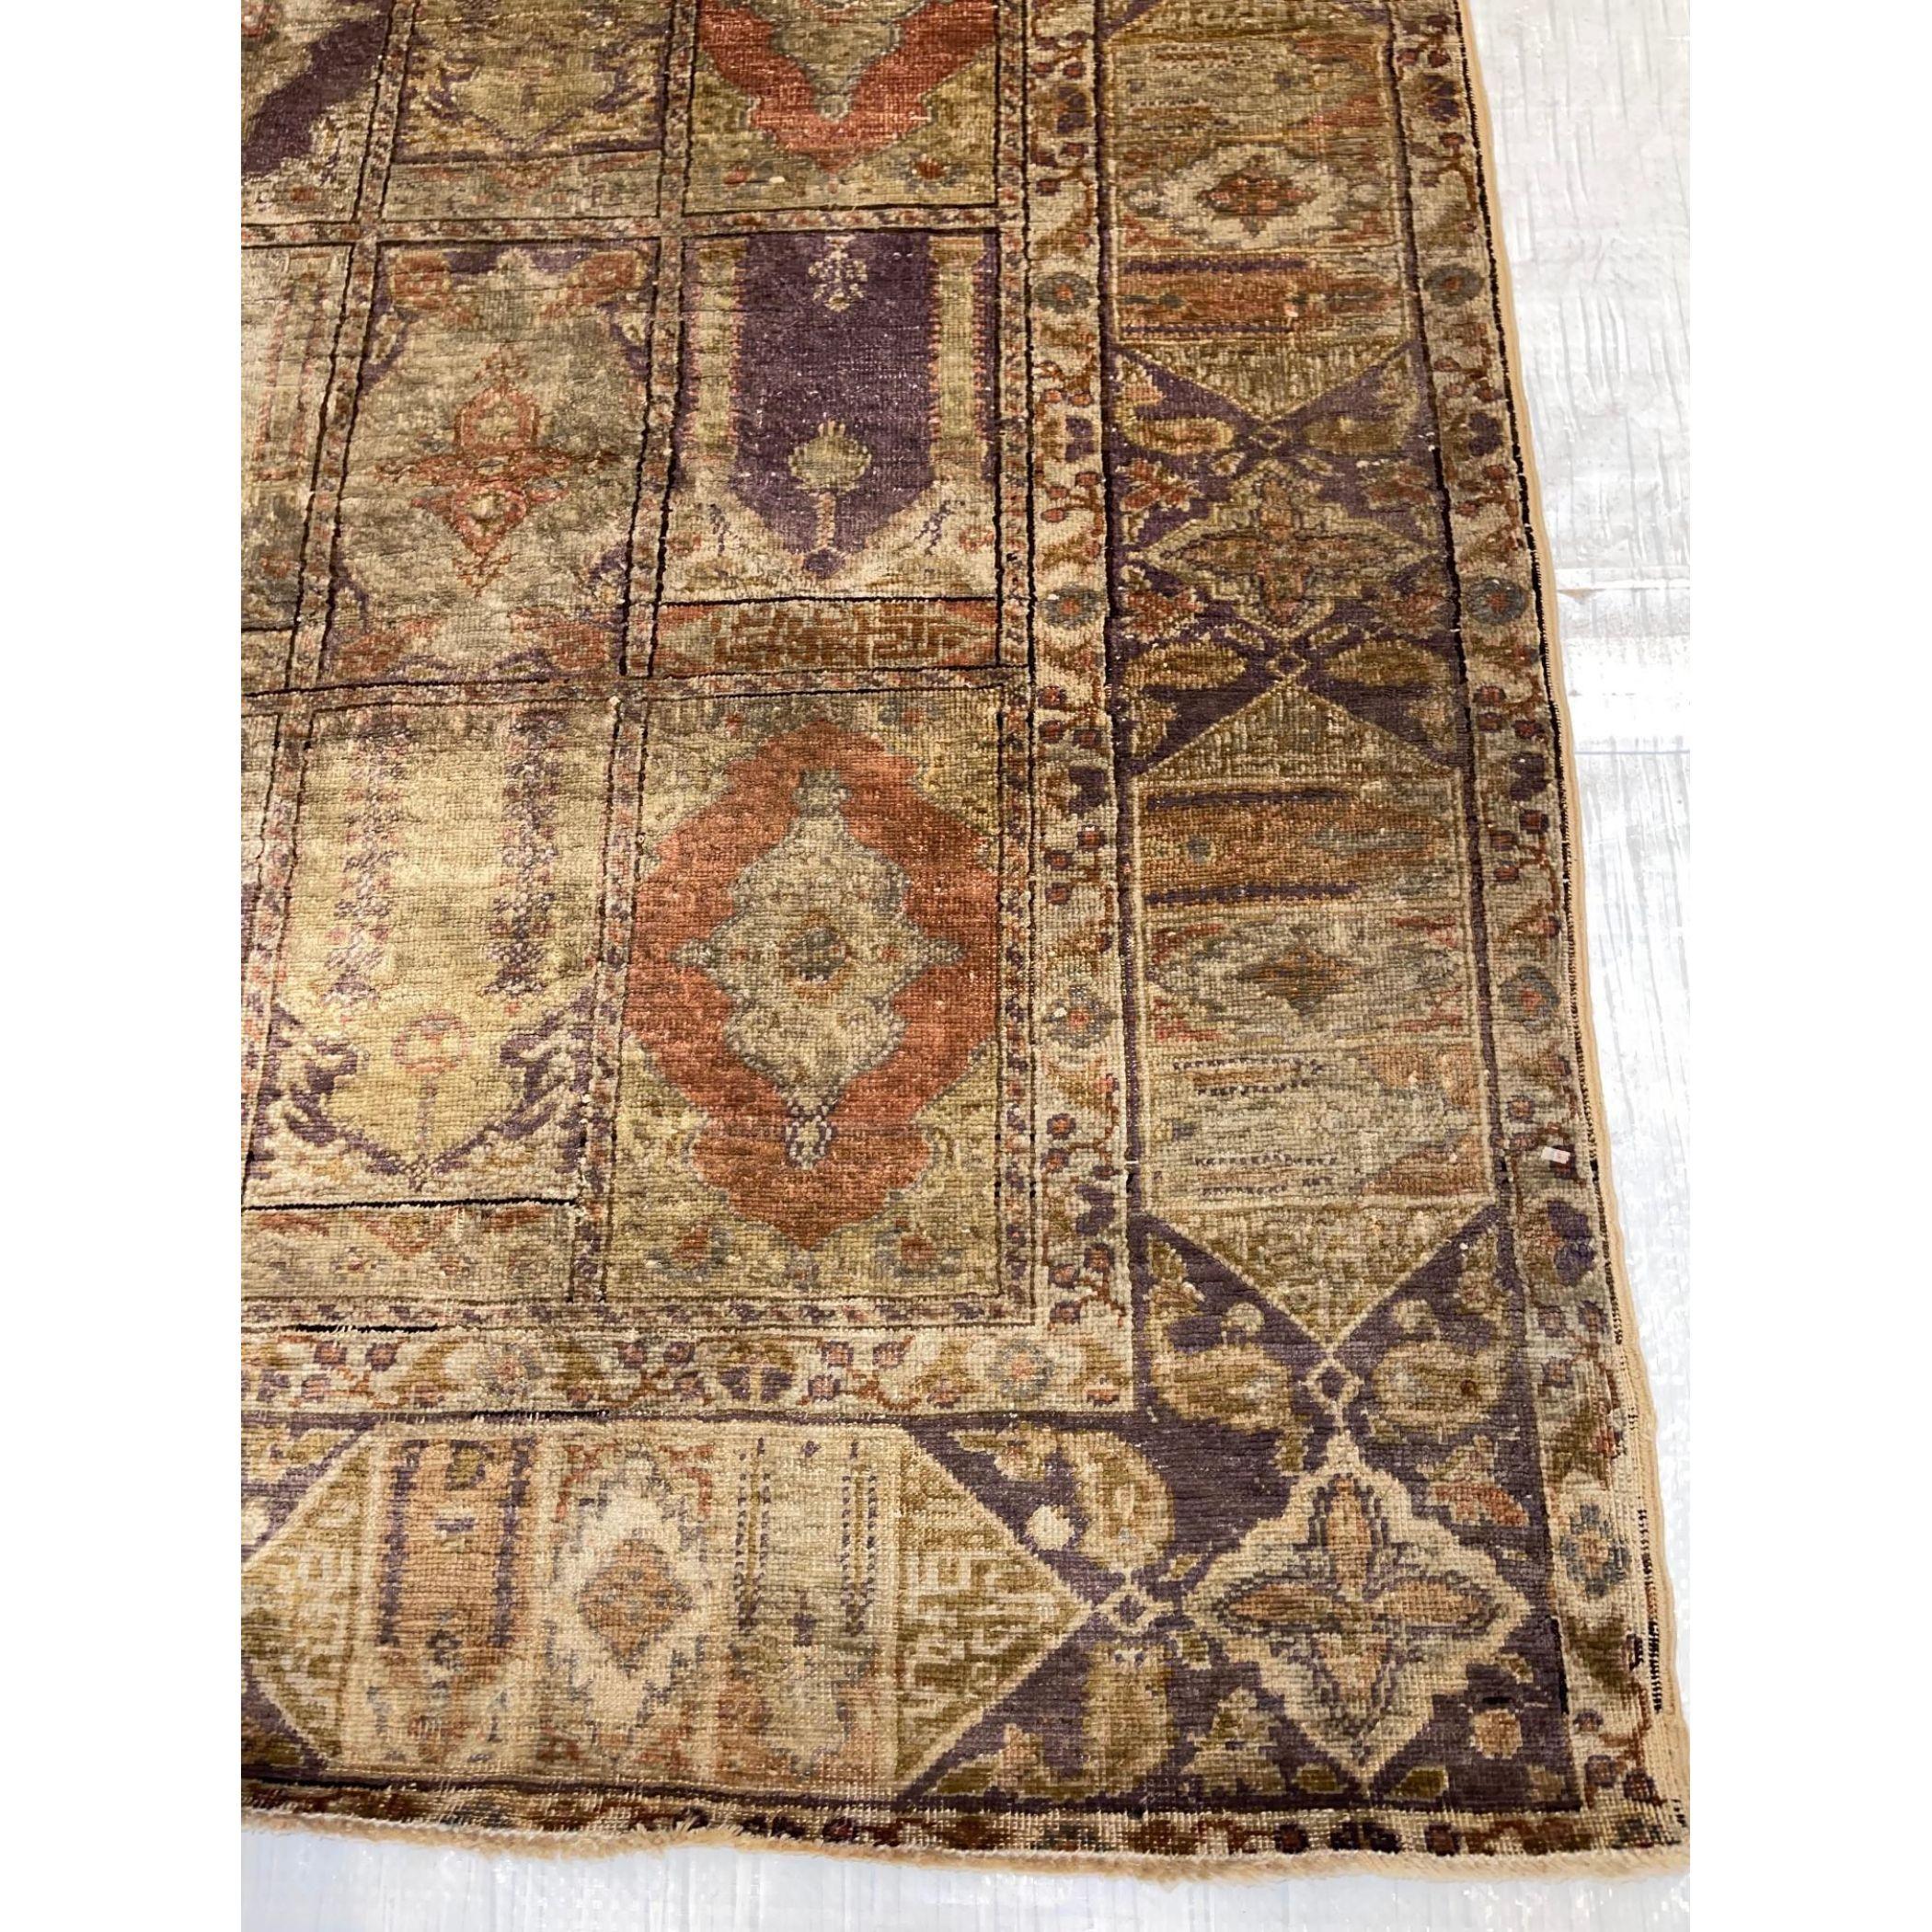 Silk Rugs – Silk Carpets and area rugs are the most luxurious productions of their kind. The silk textile production began in China, although silk rugs are unattested there until the seventeenth century.

Silk textile manufacture was well